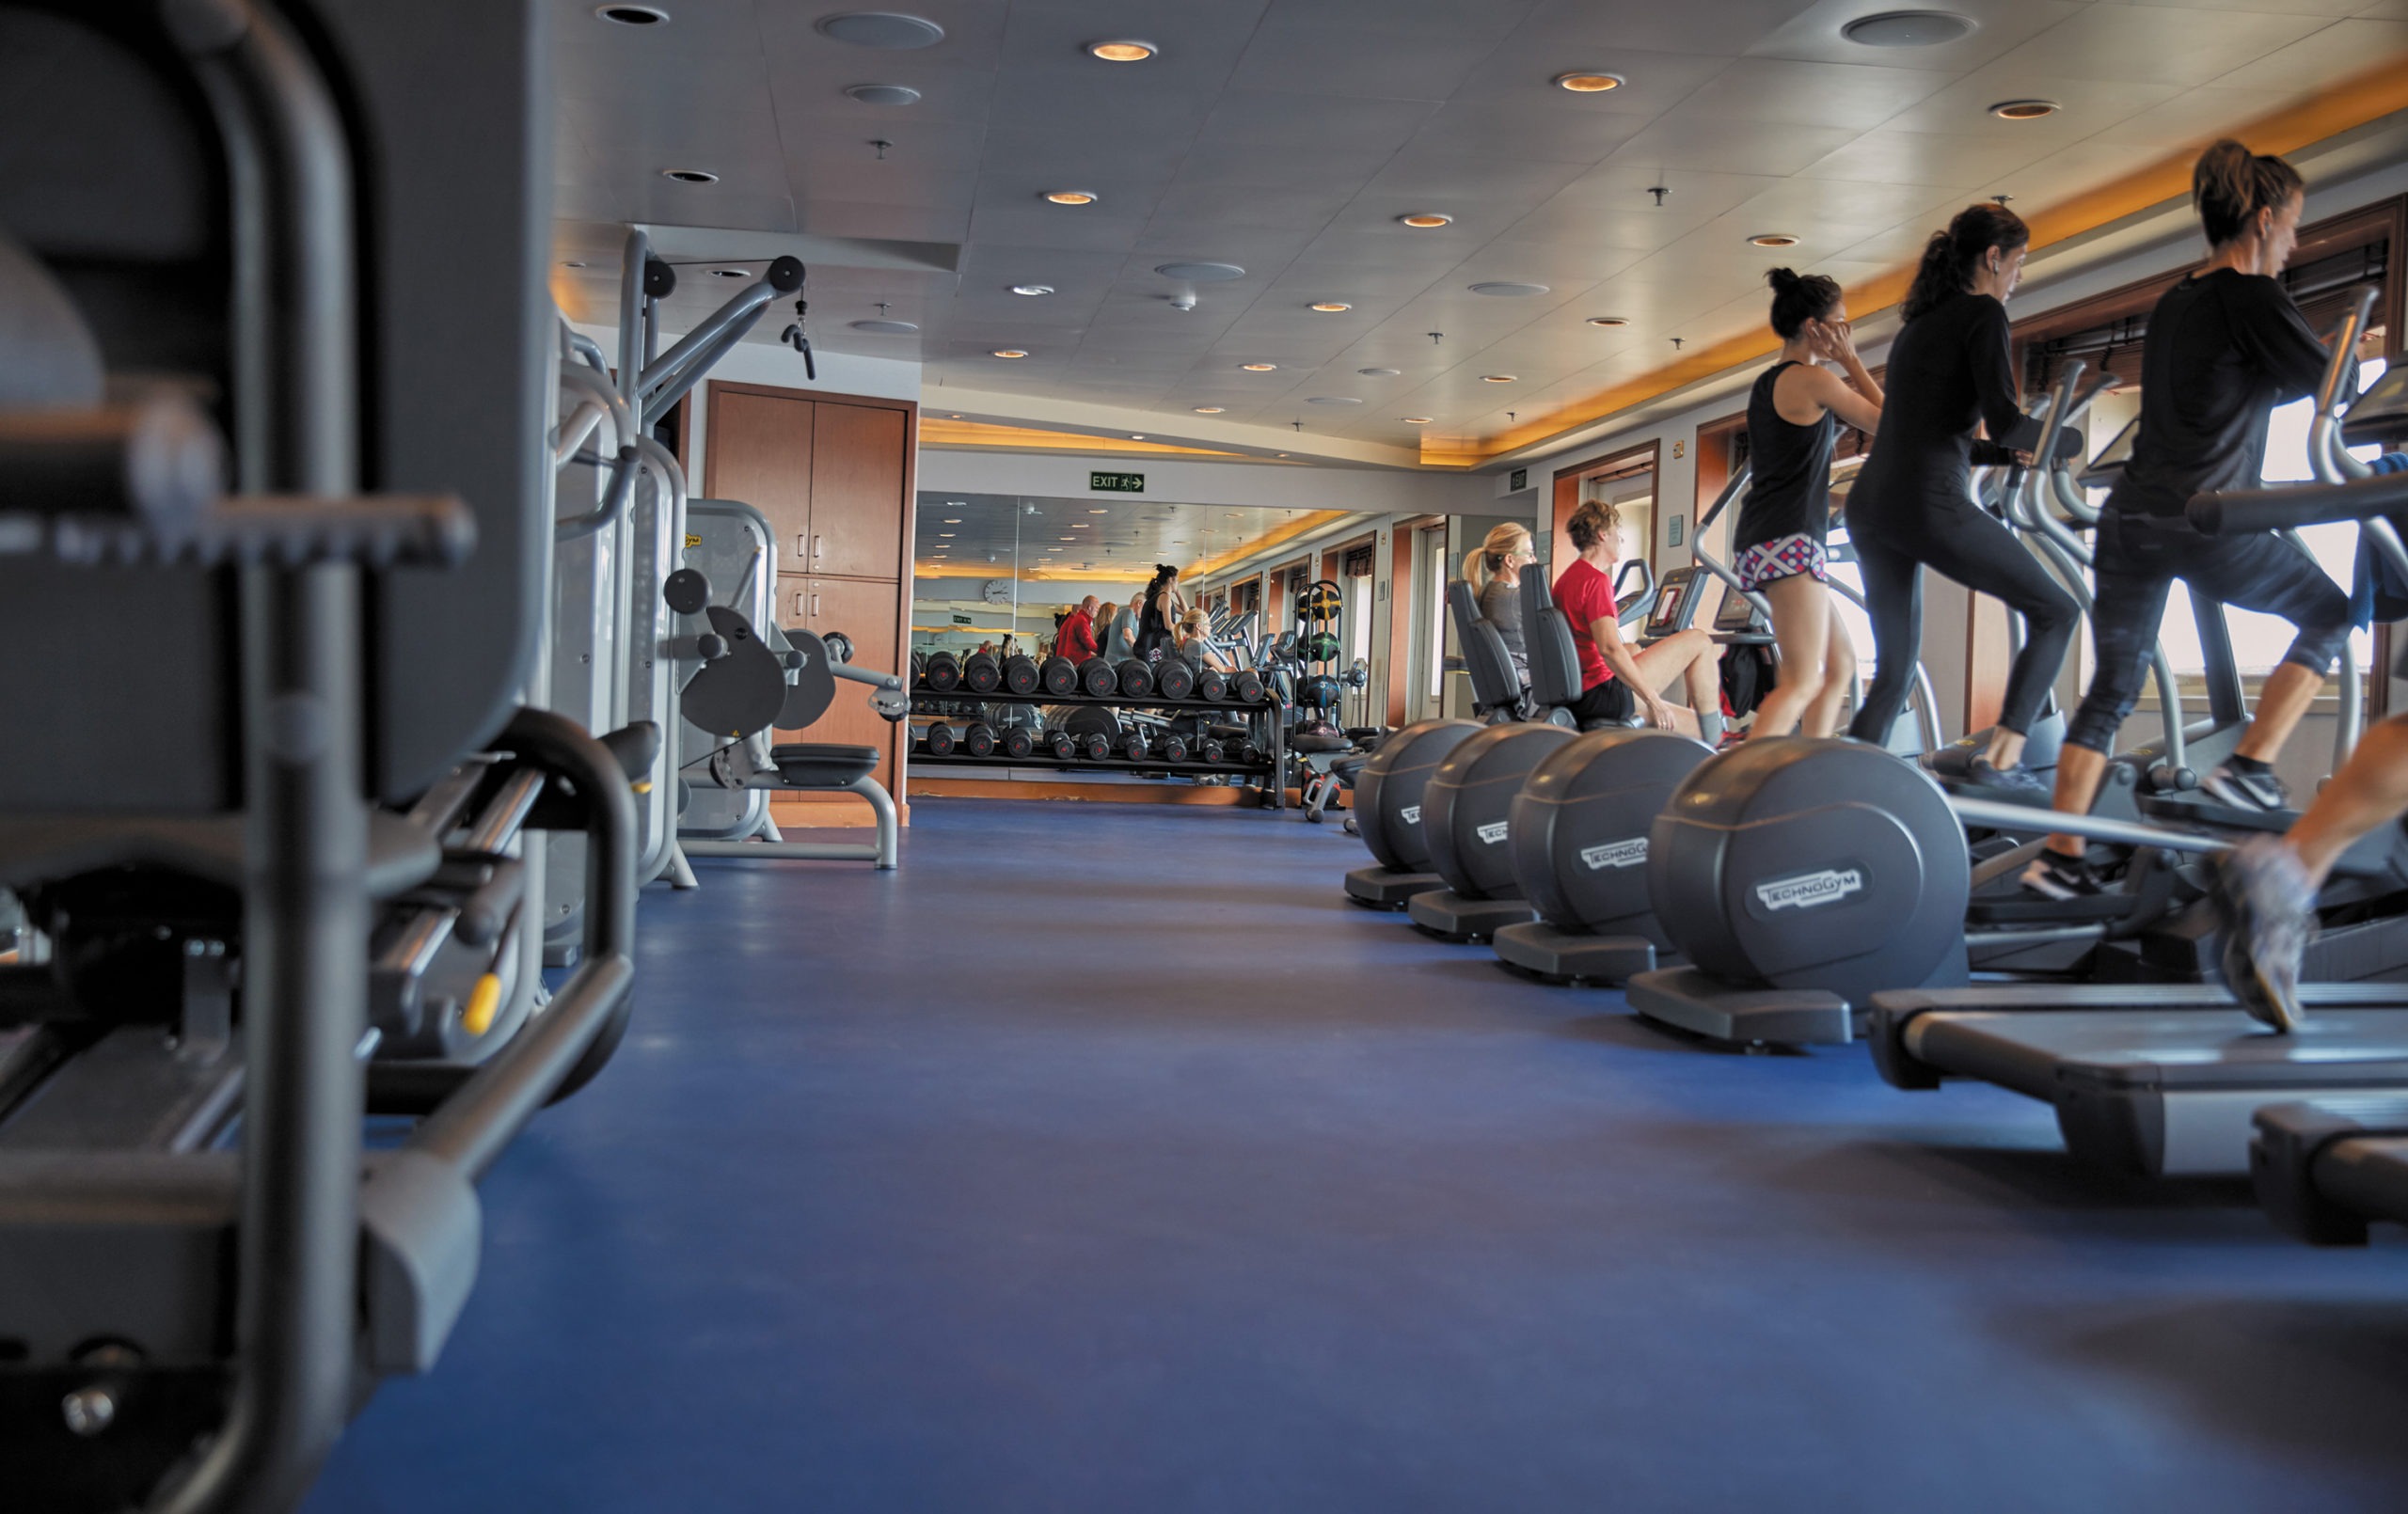 Seven Seas Voyager Fitness Centre